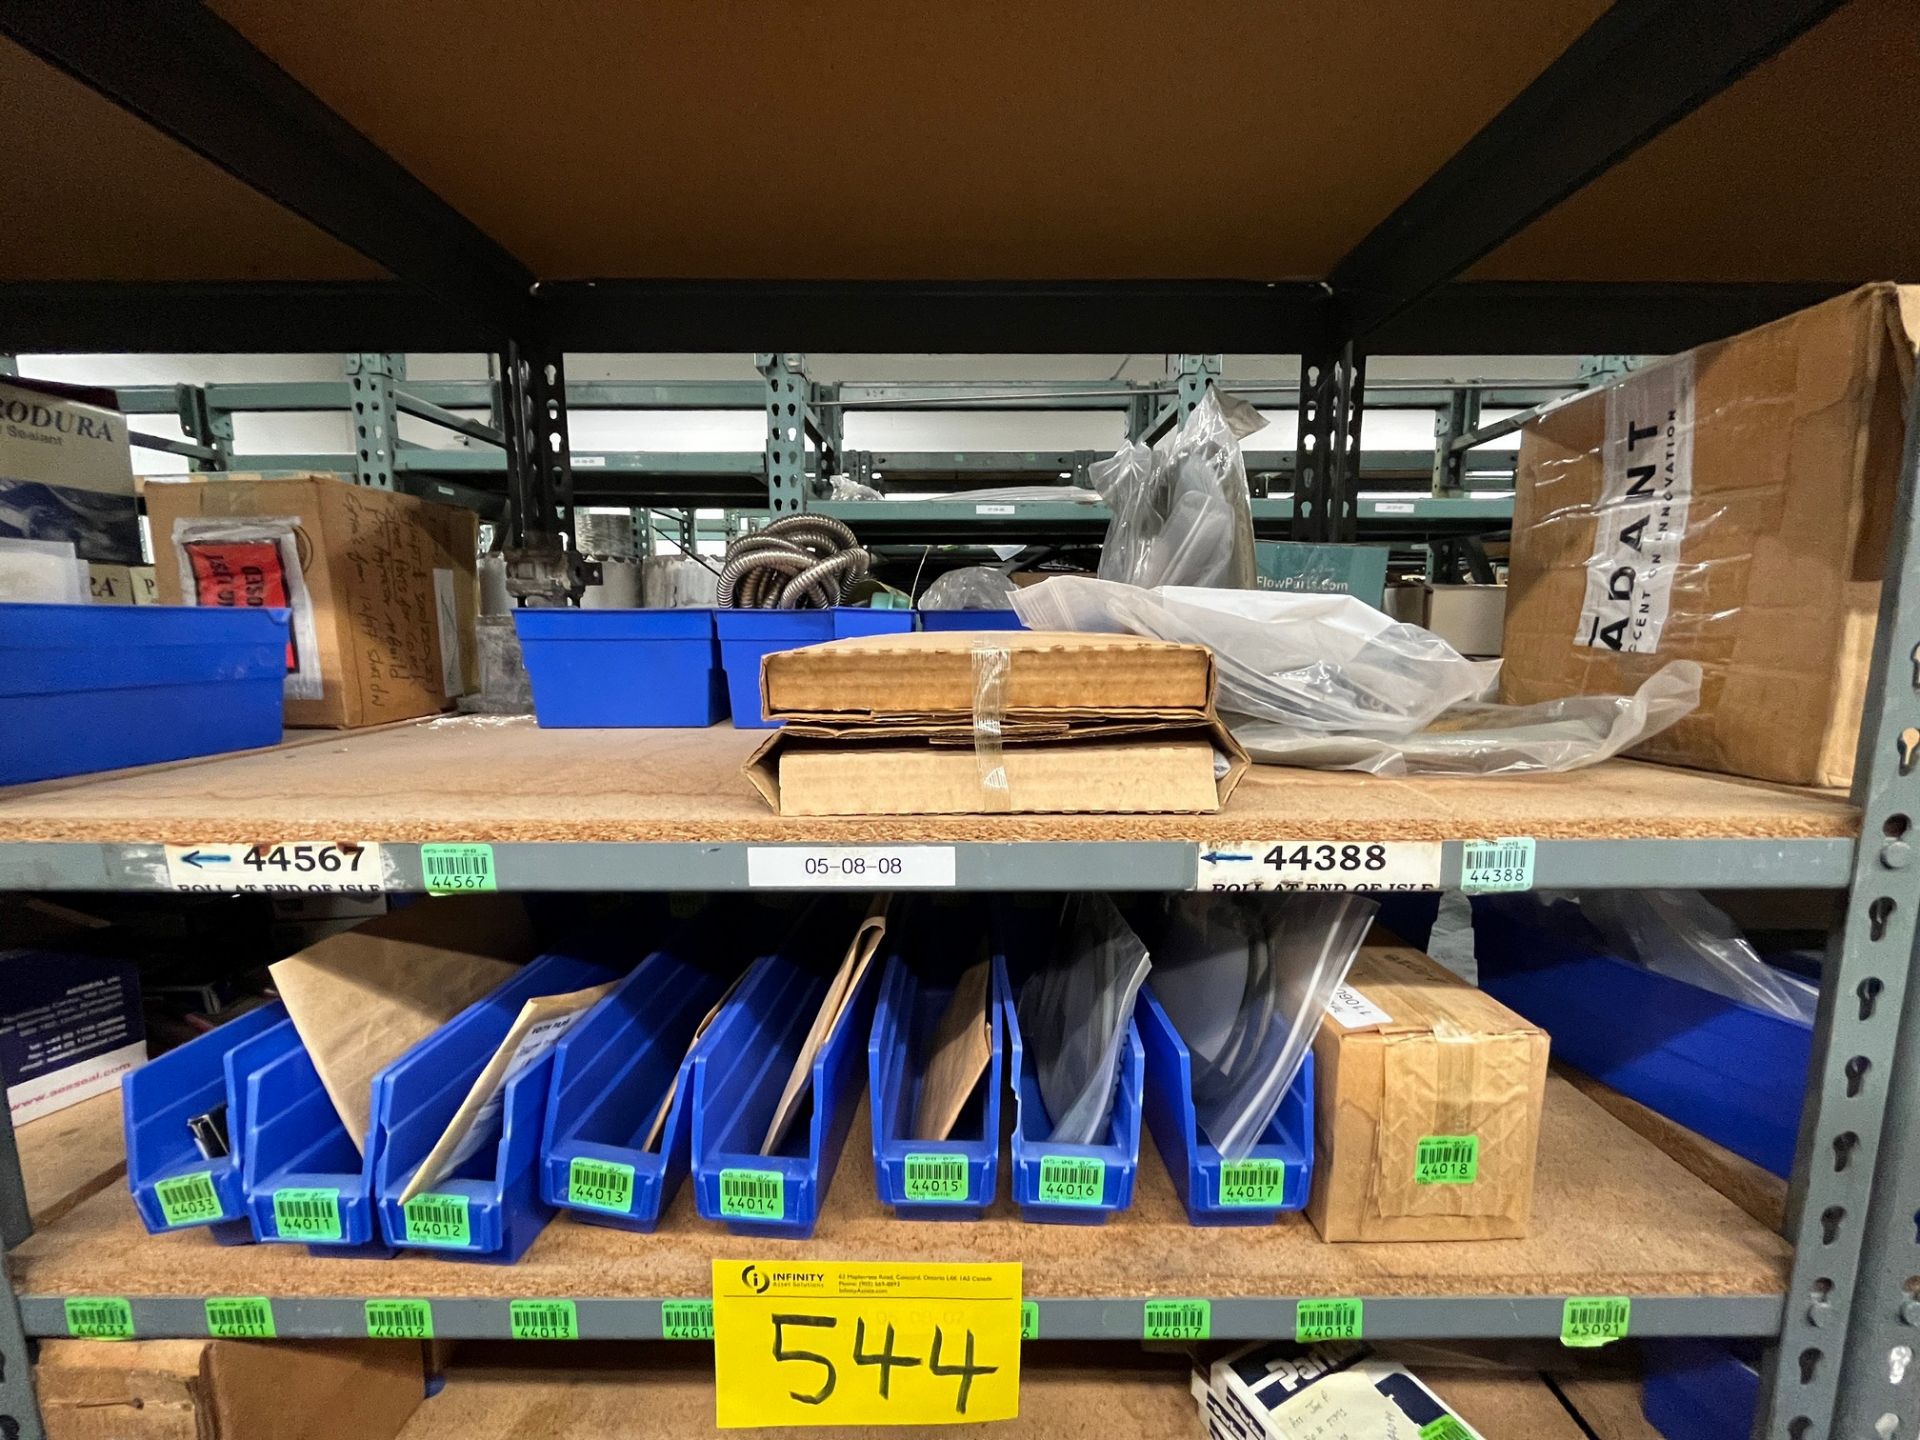 CONTENTS OF (2) SECTIONS OF 2-SIDED RACKING INCLUDING FLOW PARTS, RELIEF VALVES, PUMP PARTS, OIL - Image 11 of 16